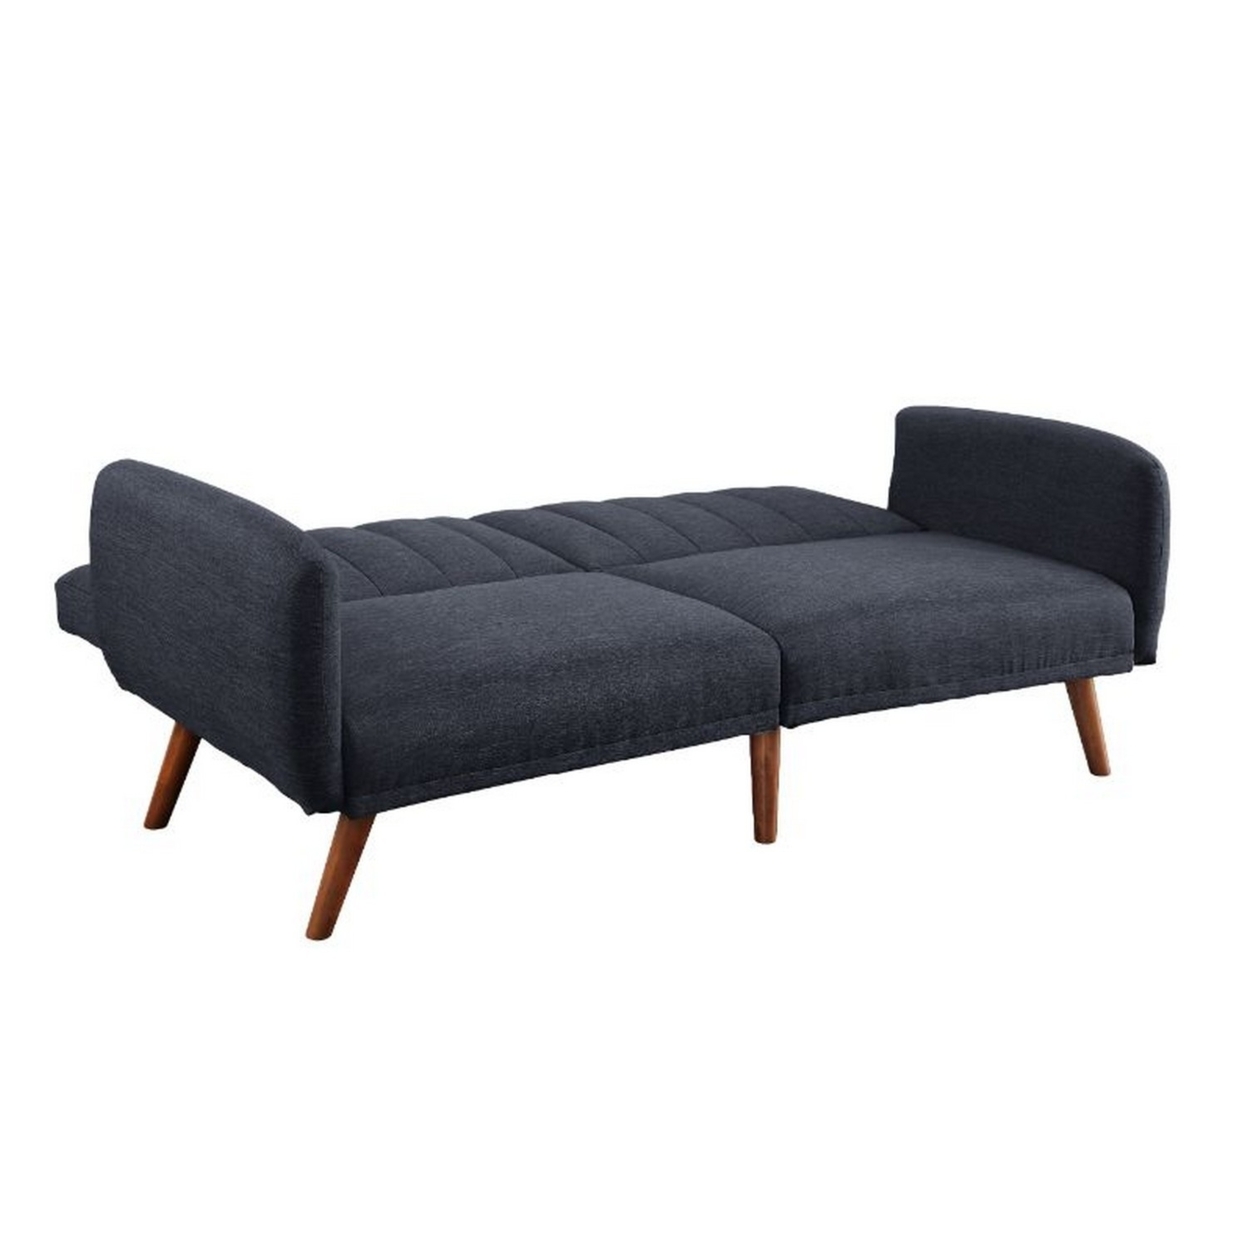 Adjustable Sofa With Channel Stitching And Angled Legs, Gray- Saltoro Sherpi